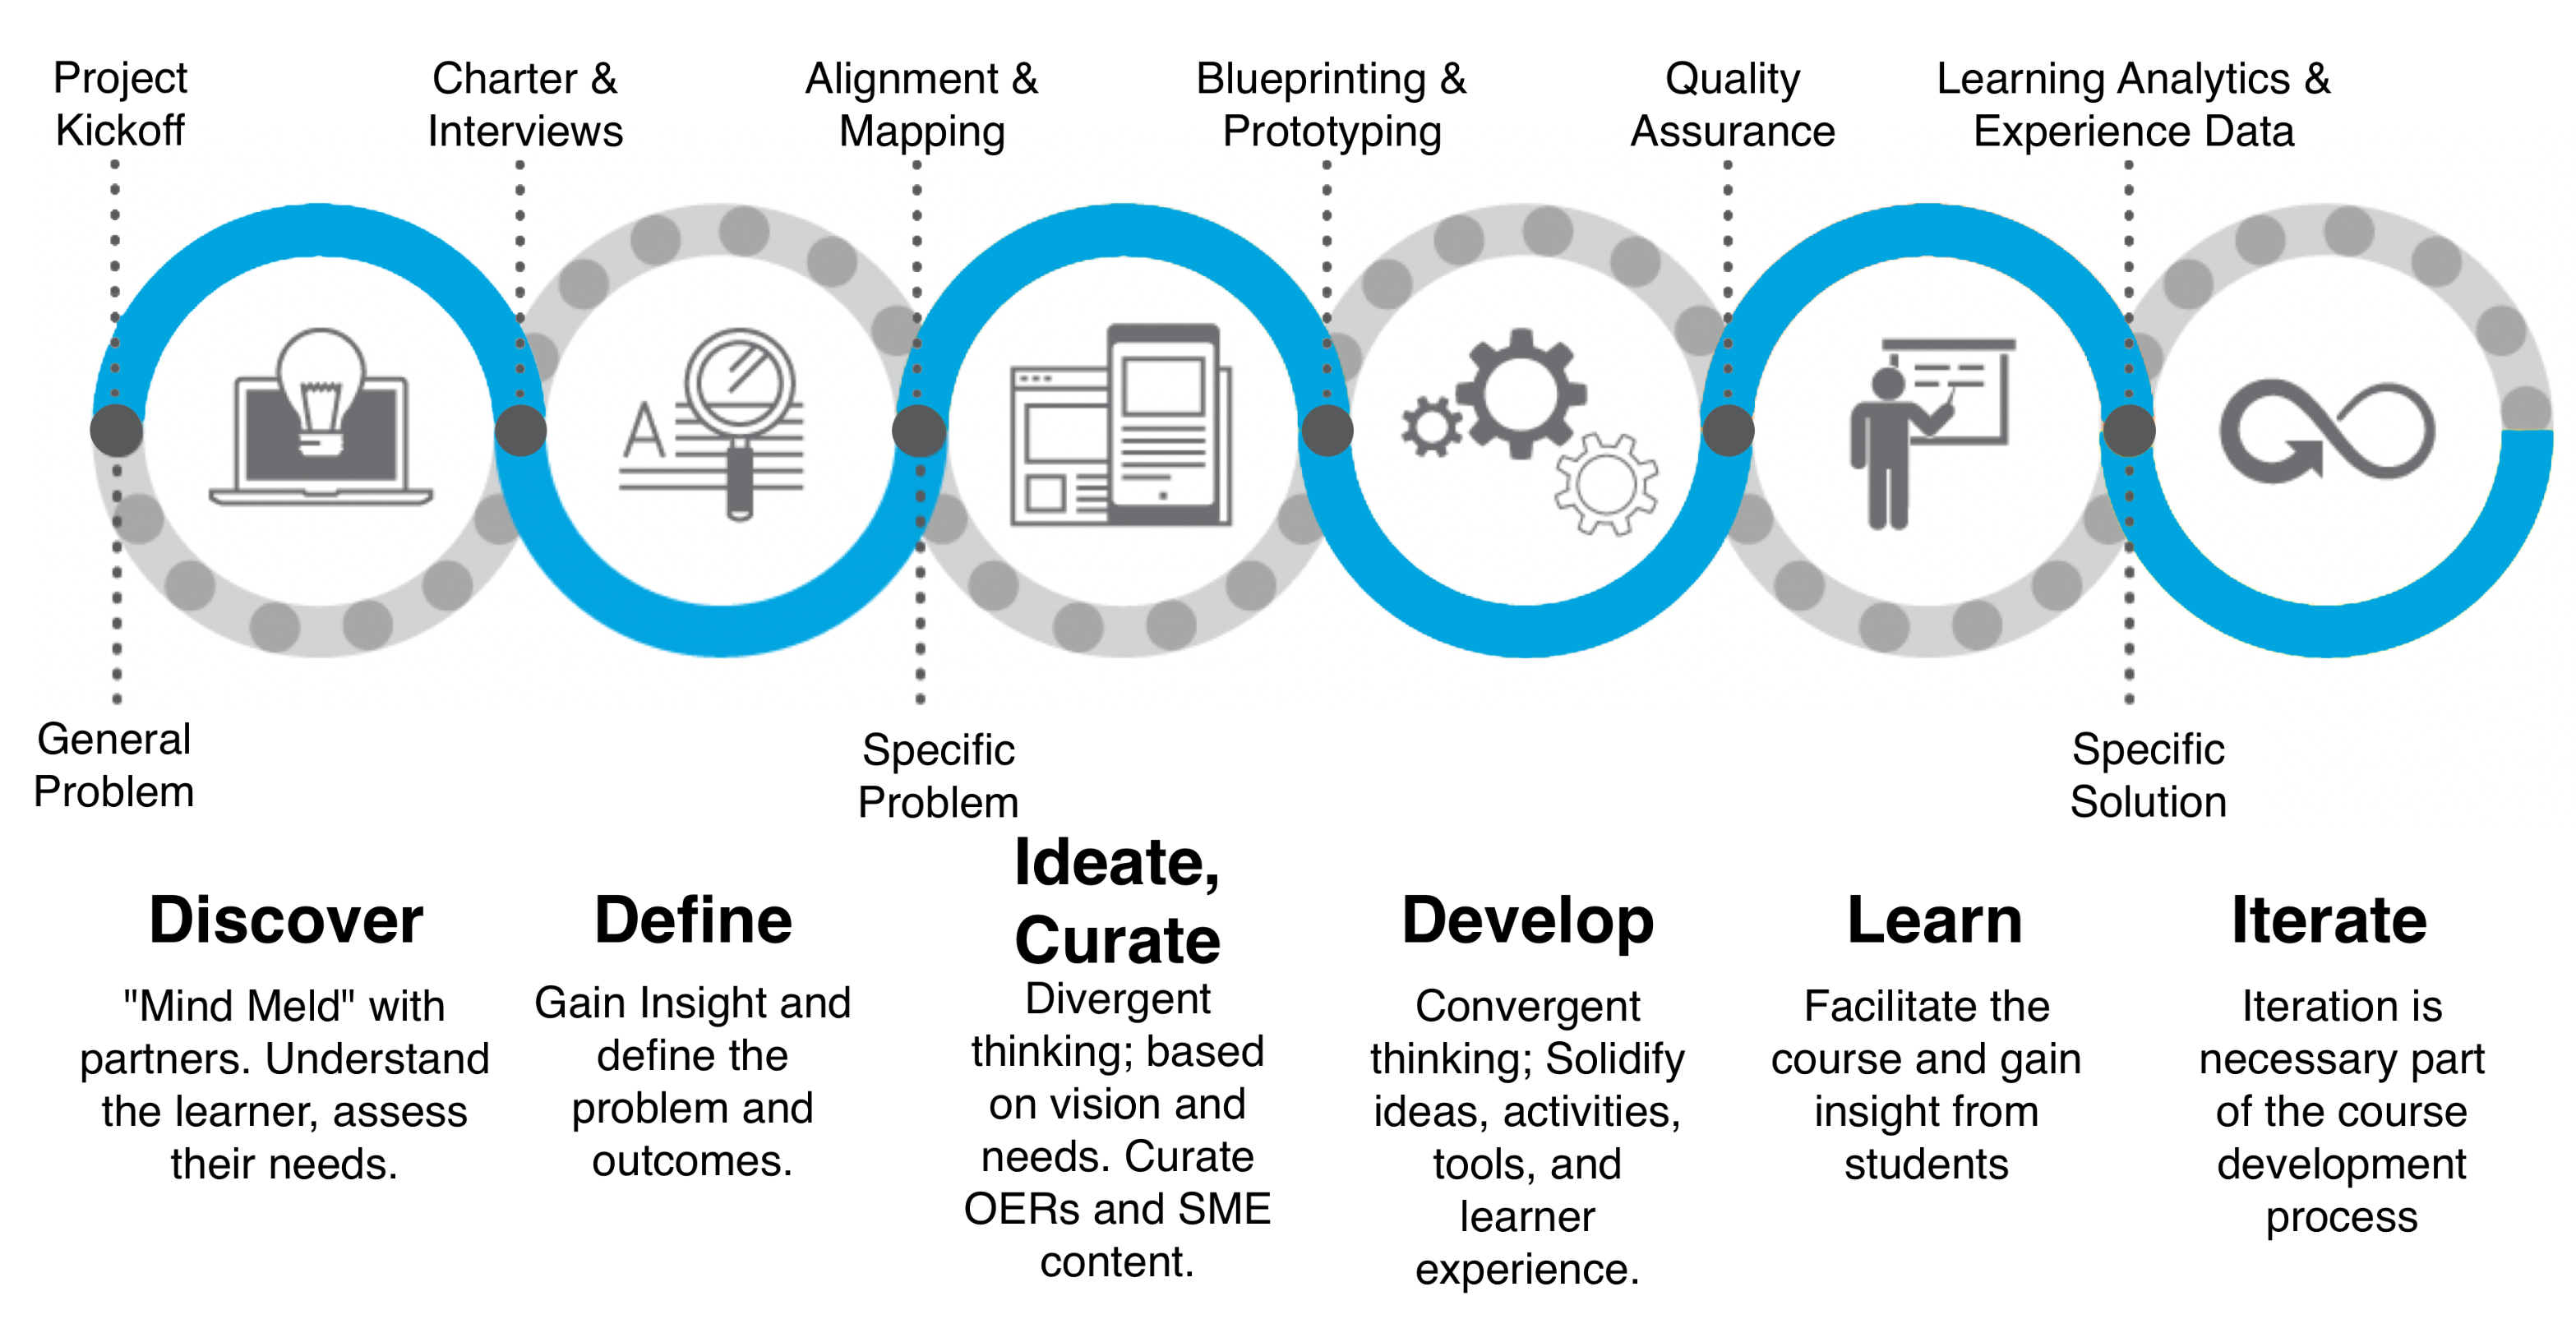 Image of the flow for Design thinking in Instructional Design; starting from left to right are discover, define, ideate, curate, develop, learn, iterate